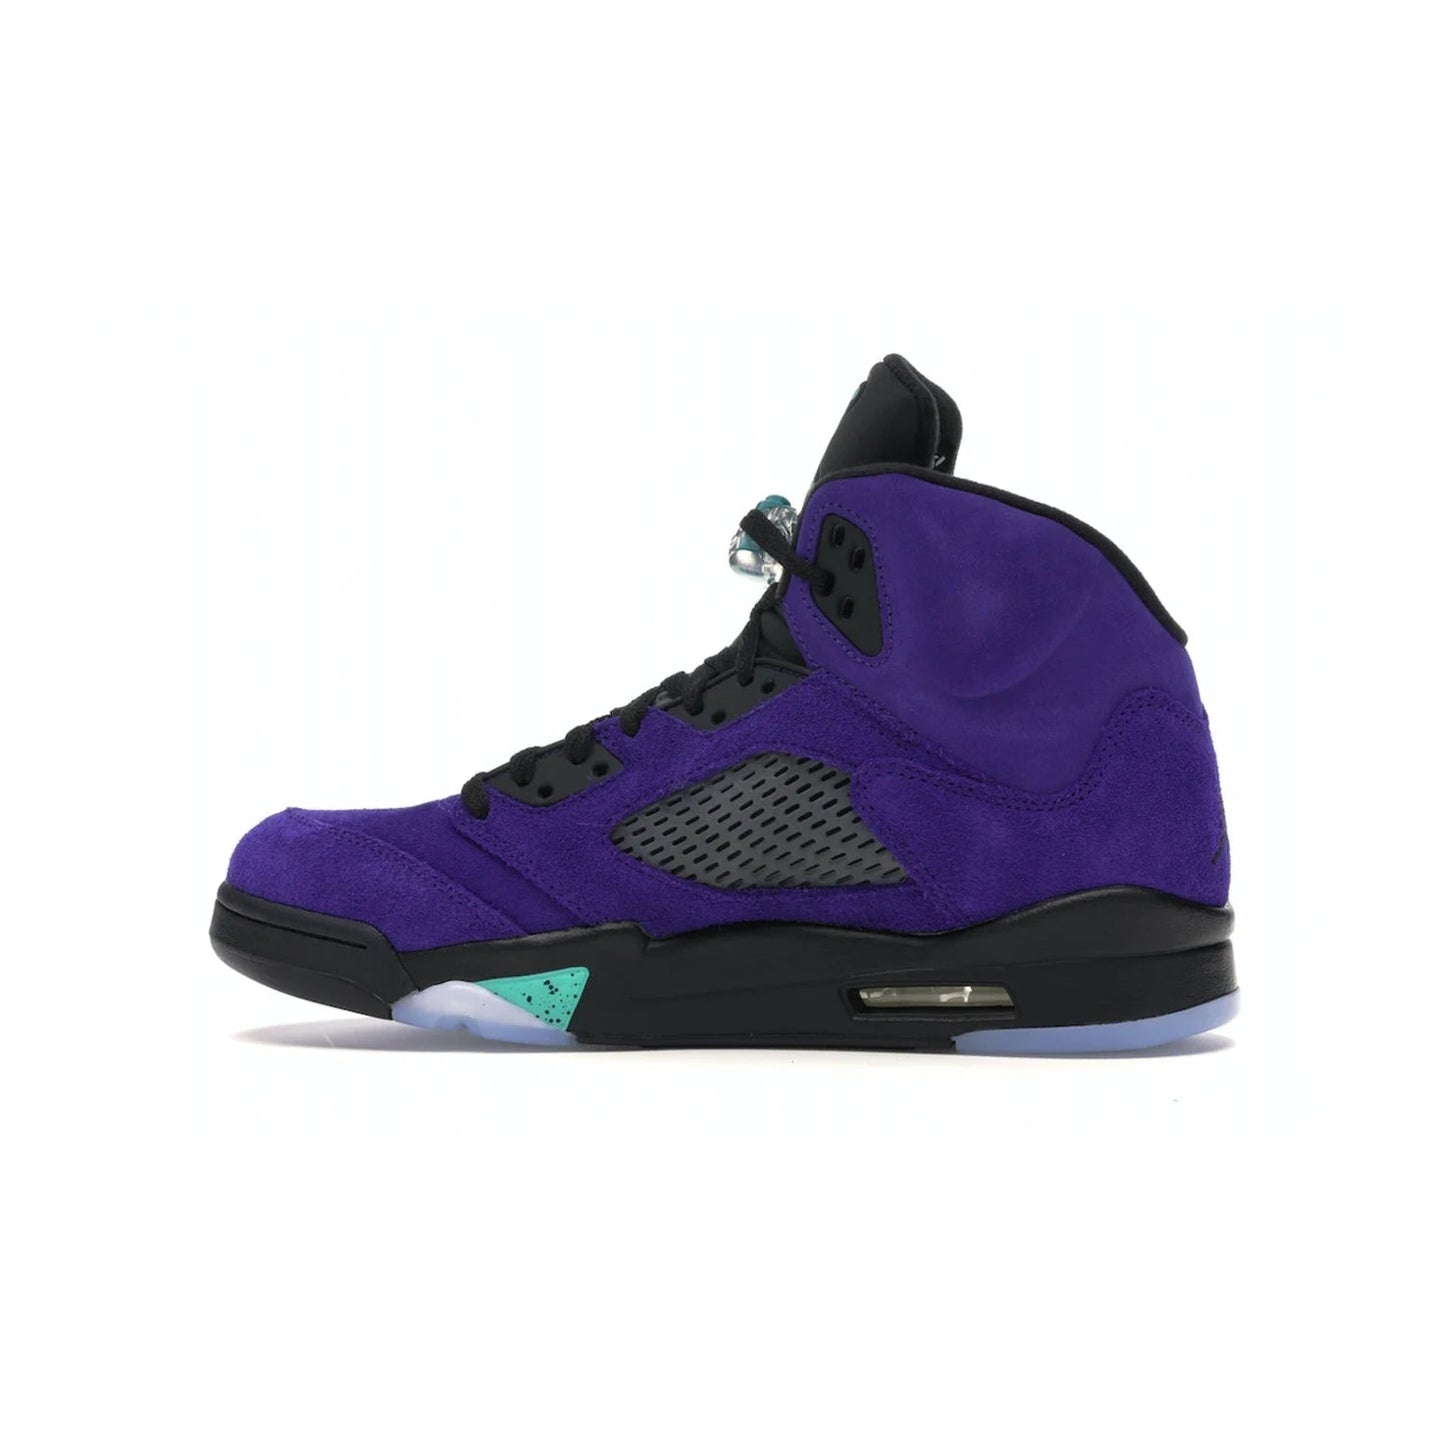 Jordan 5 Retro Alternate Grape - Image 20 - Only at www.BallersClubKickz.com - Bring the classic Jordan 5 Retro Alternate Grape to your sneaker collection! Featuring a purple suede upper, charcoal underlays, green detailing, and an icy and green outsole. Releasing for the first time since 1990, don't miss this chance to add a piece of sneaker history to your collection.